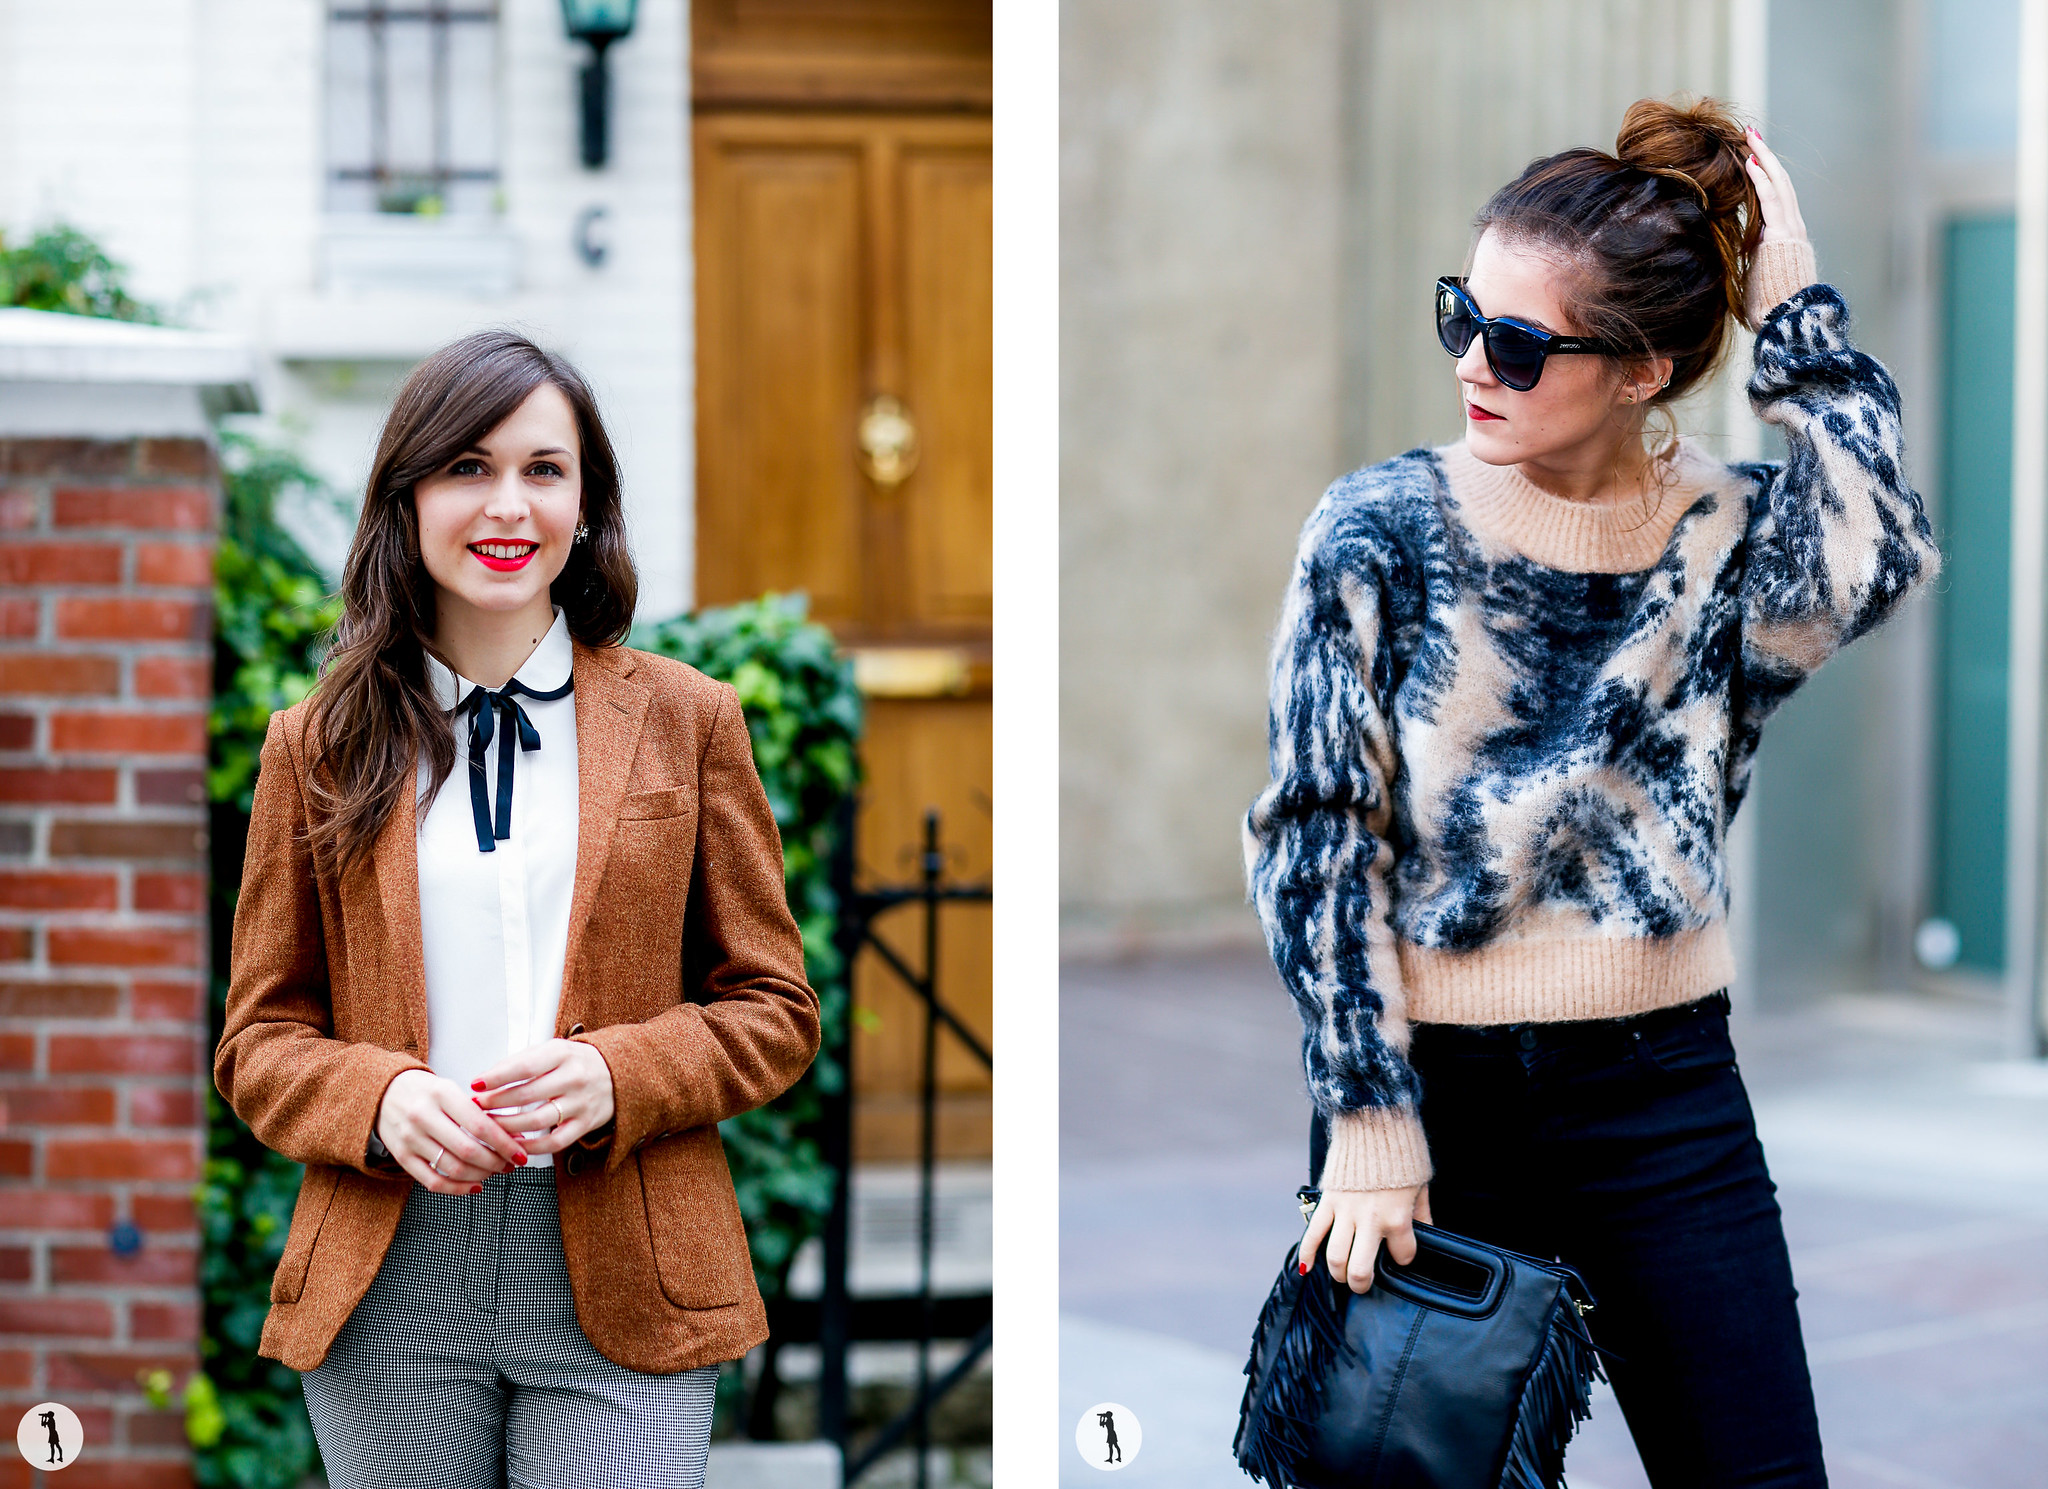 Street style Photo shooting with french bloggers in Paris.